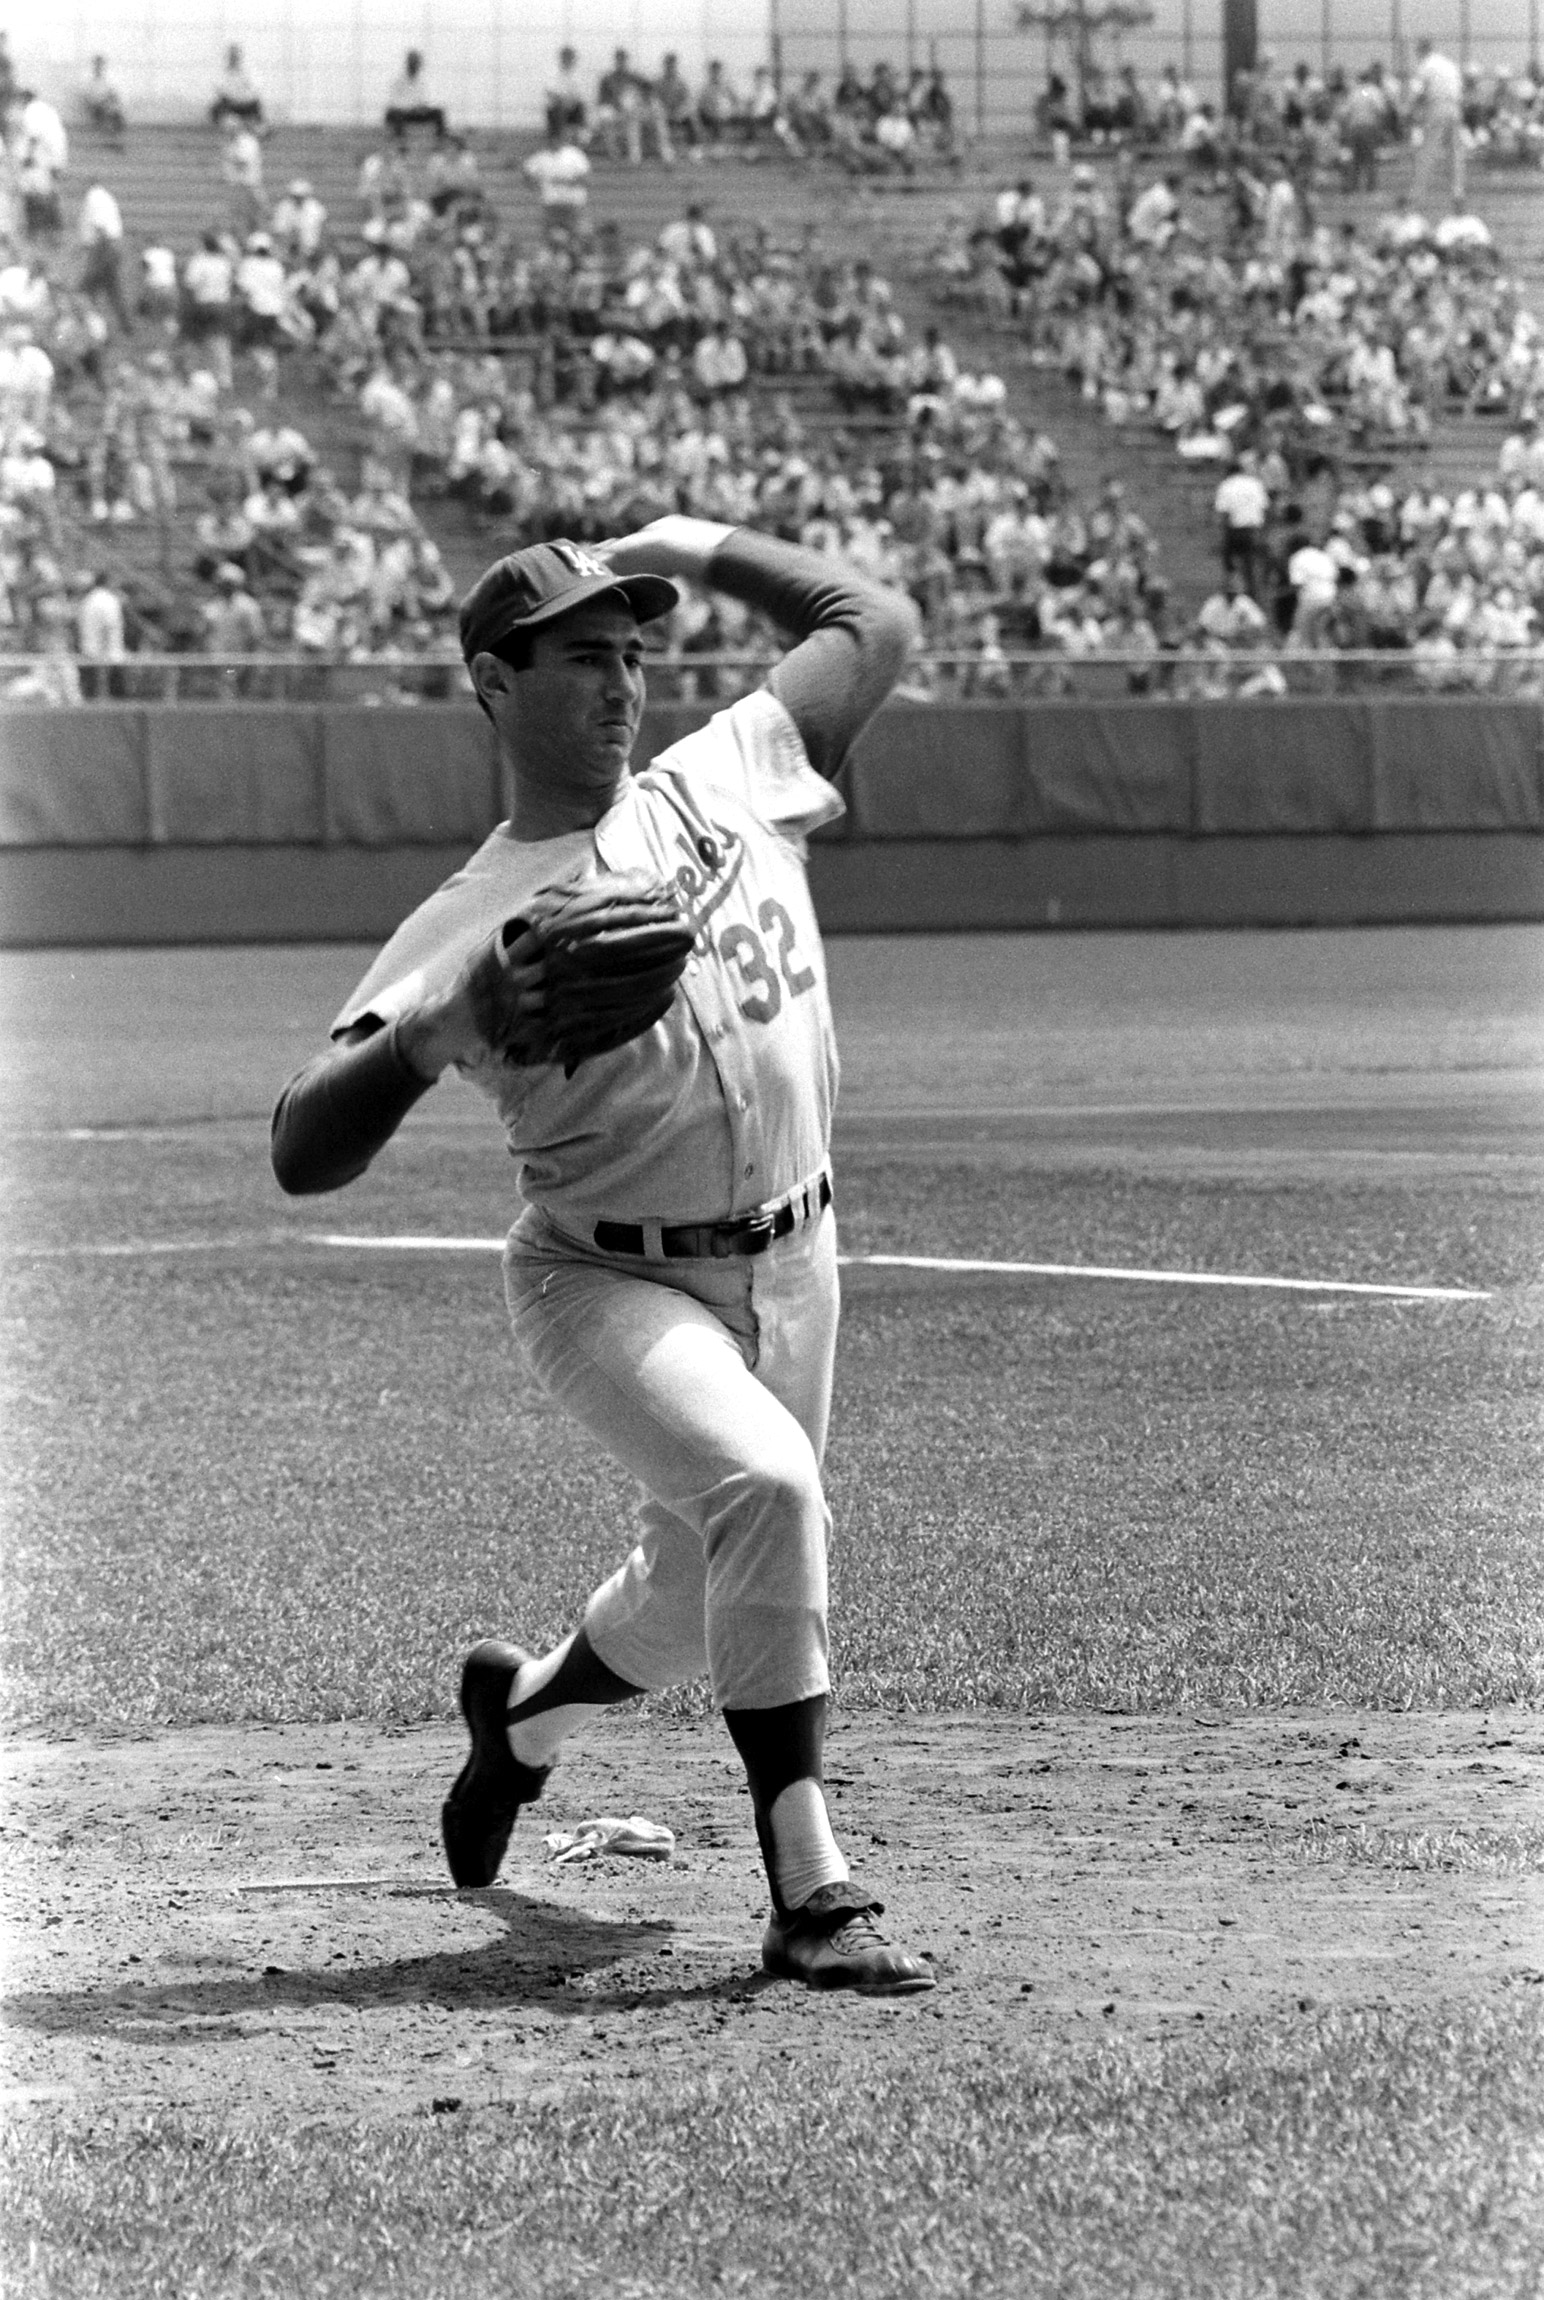 Los Angeles Dodgers pitcher Sandy Koufax in action during a game against the Milwaukee Braves. 1963.